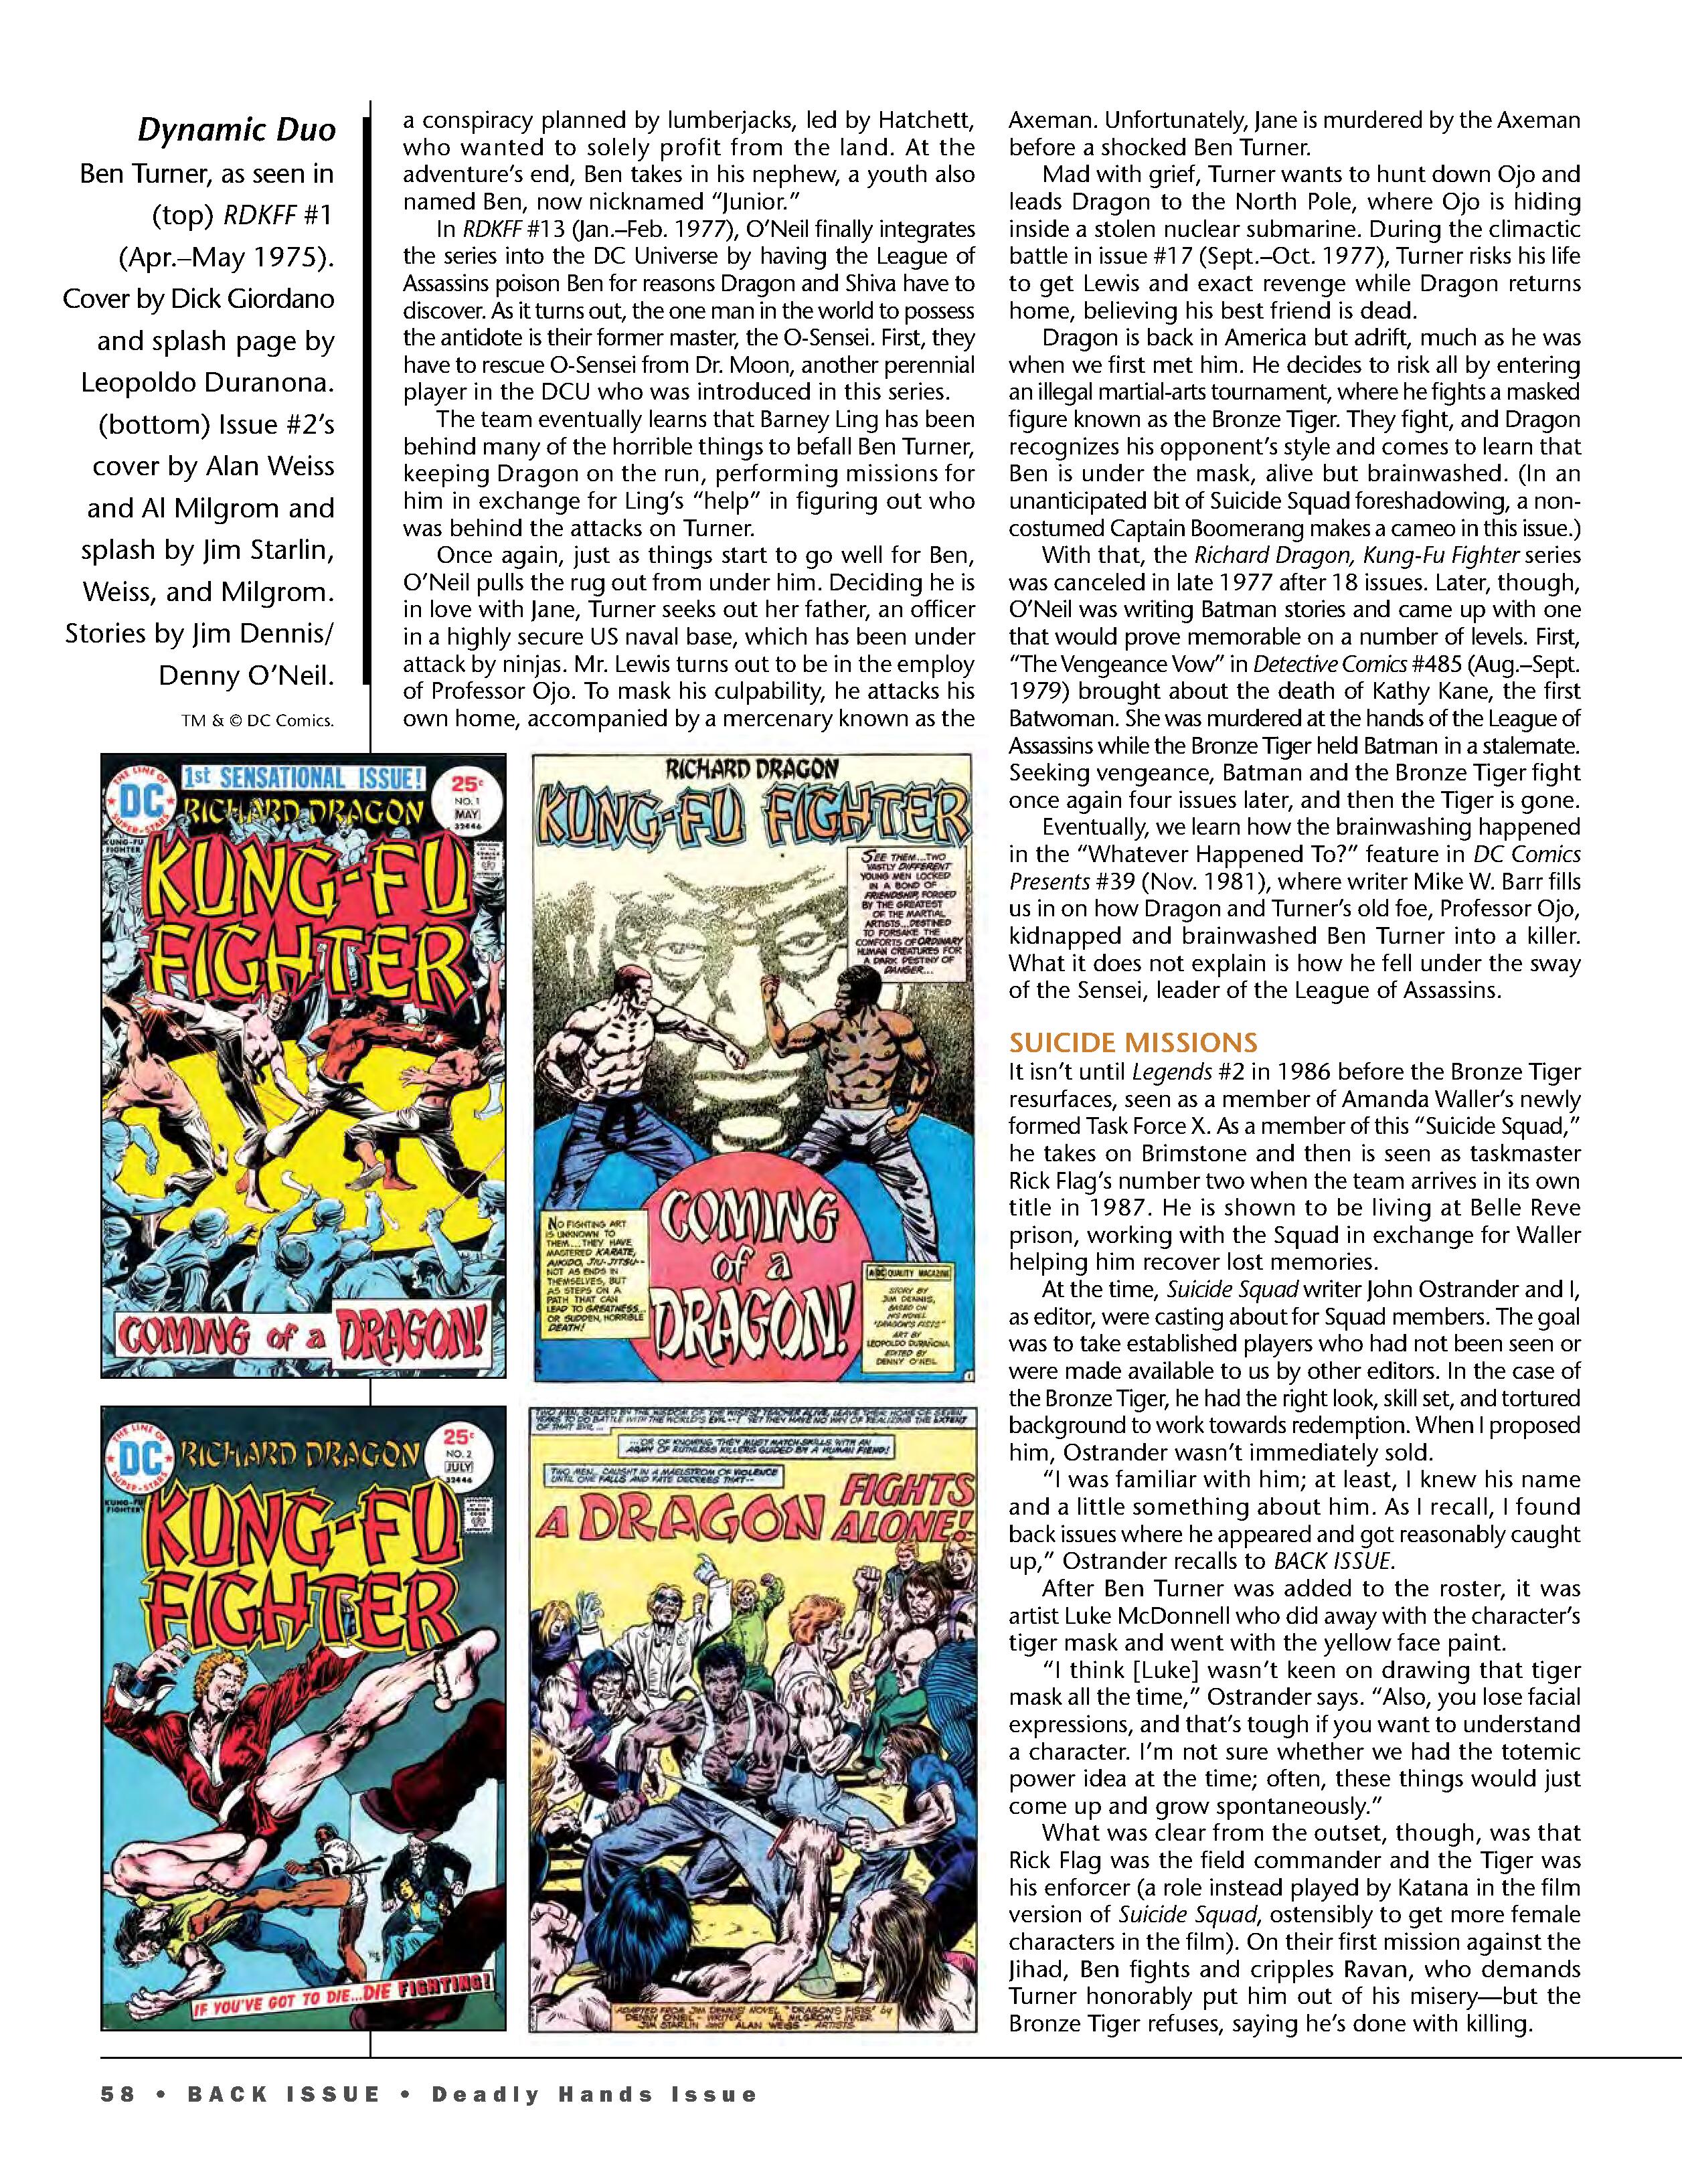 Read online Back Issue comic -  Issue #105 - 60